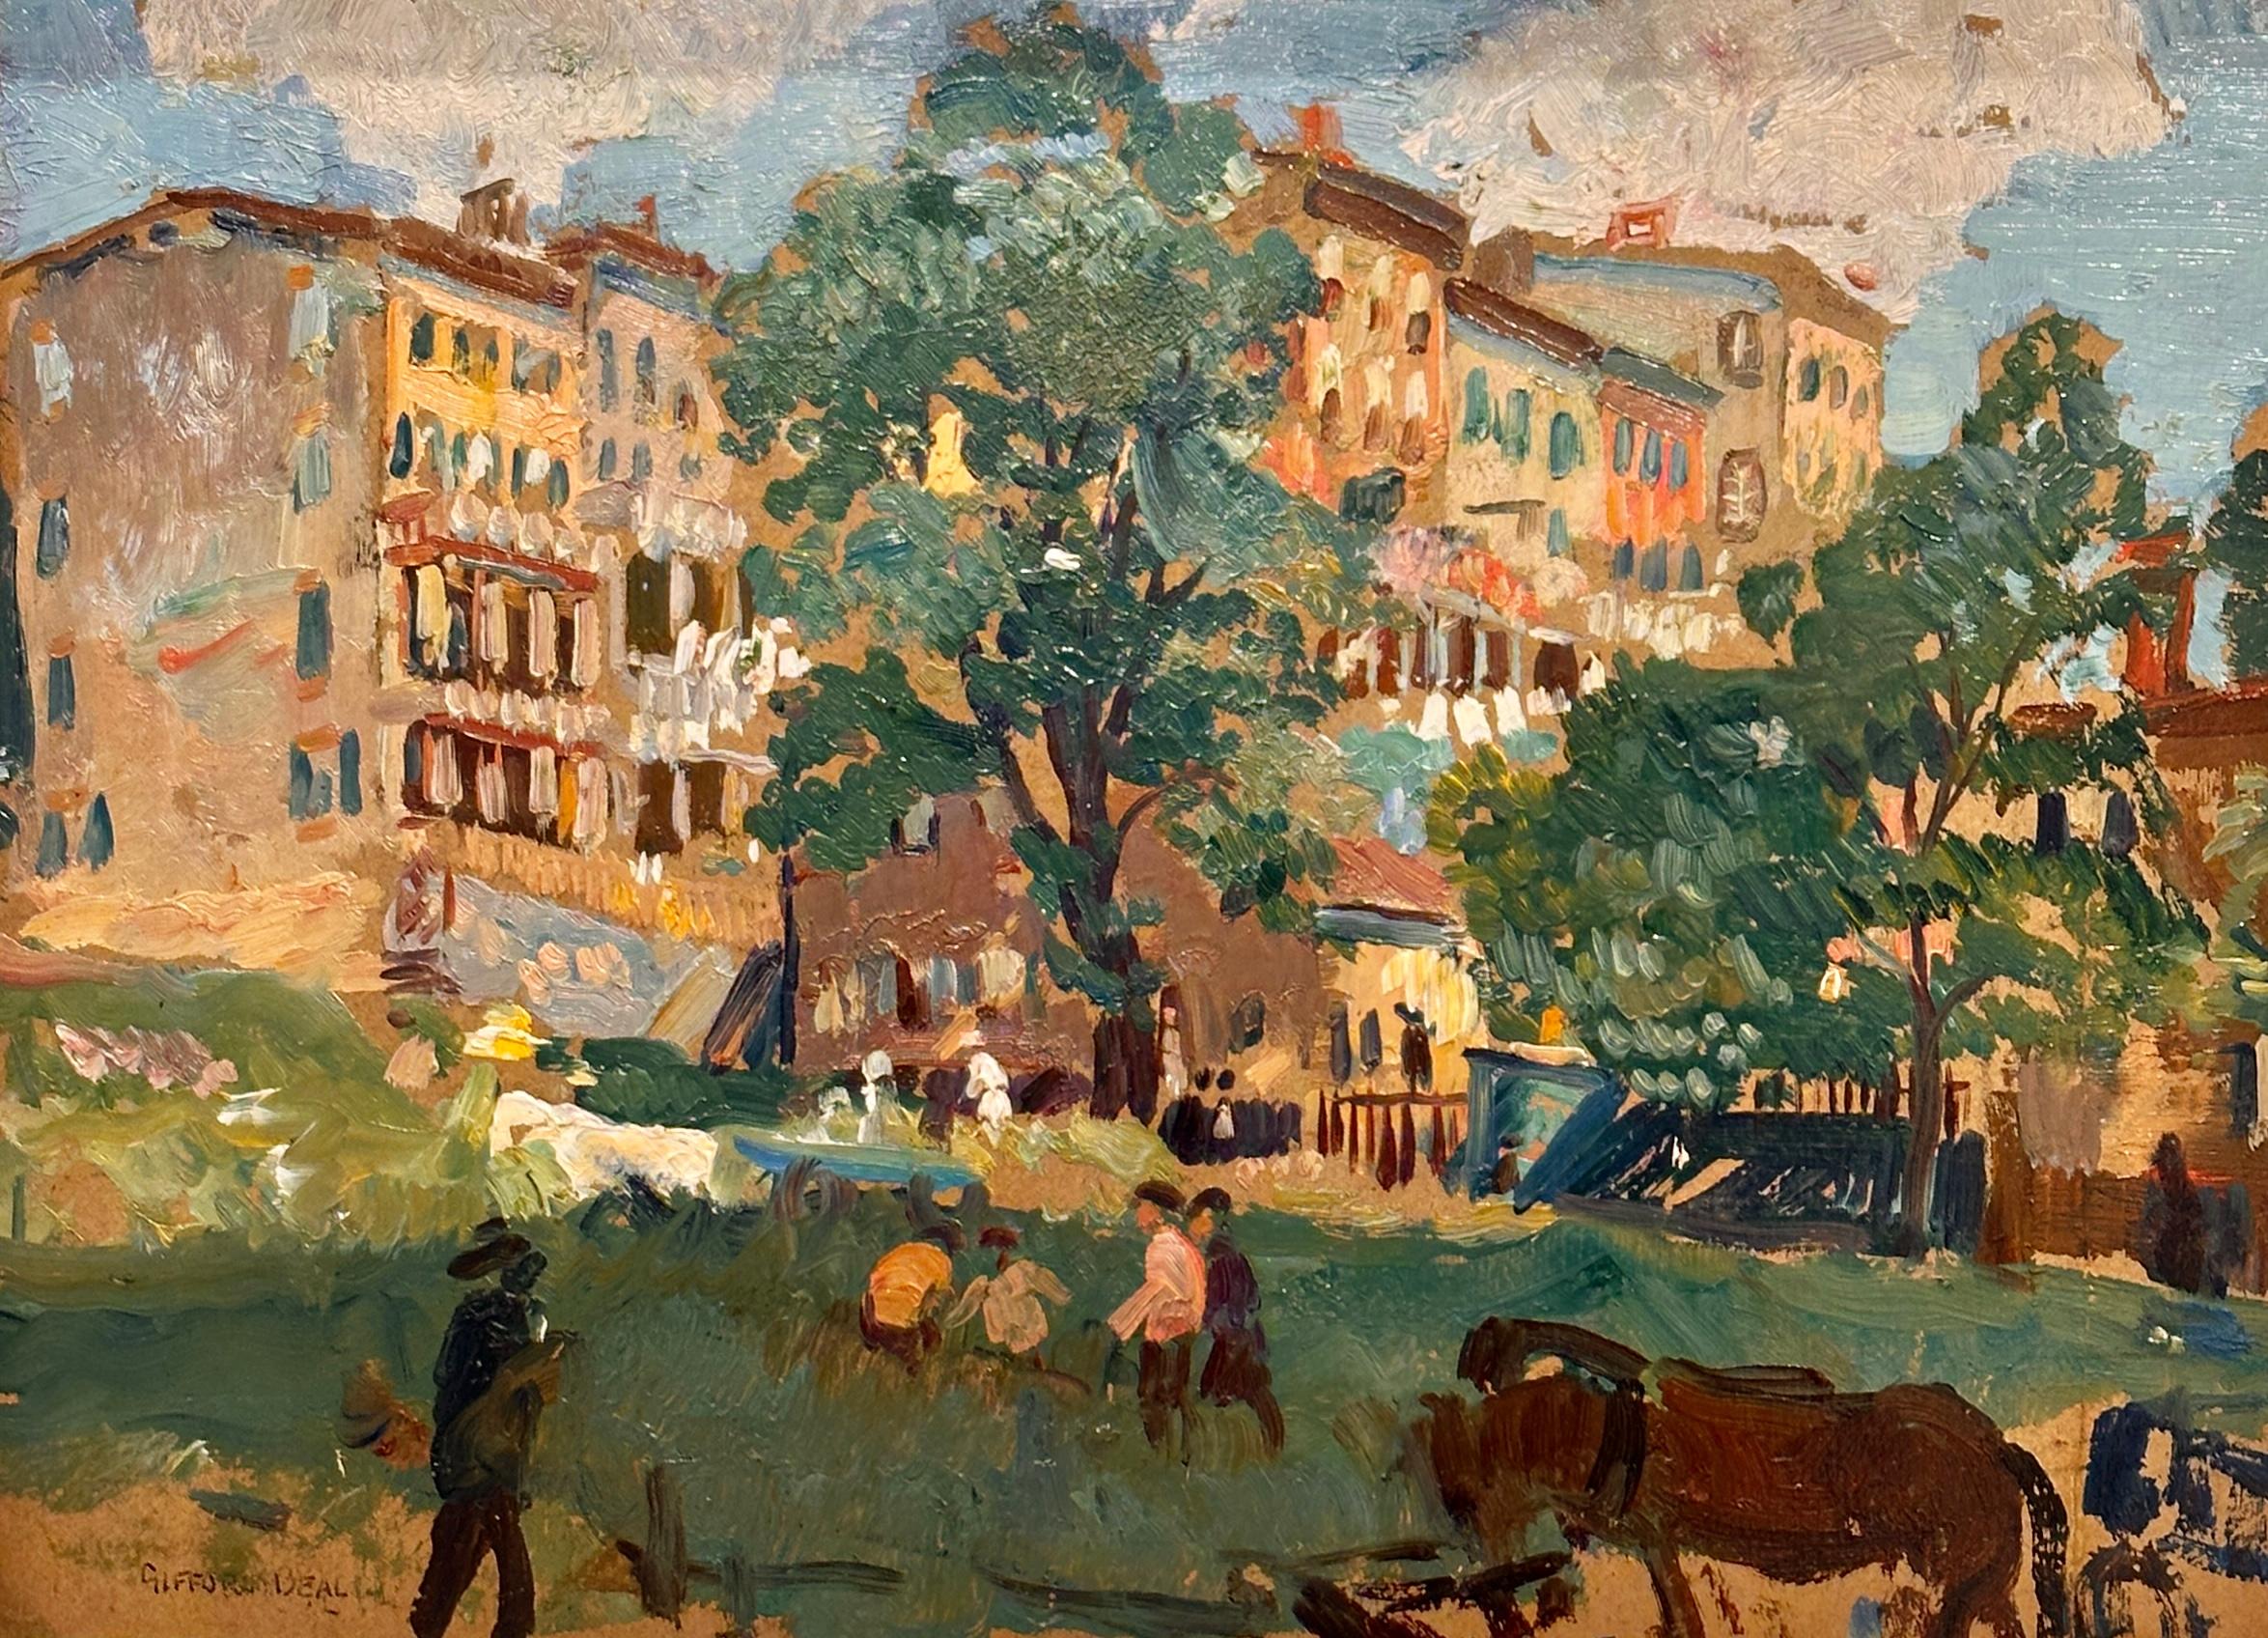 Gifford Beal always knew that he wanted to paint. At the age of 12, he began studying with William Merritt Chase in New York City and during the summer at Chase’s School in Long Island. Beal would continue his work with Chase while attending